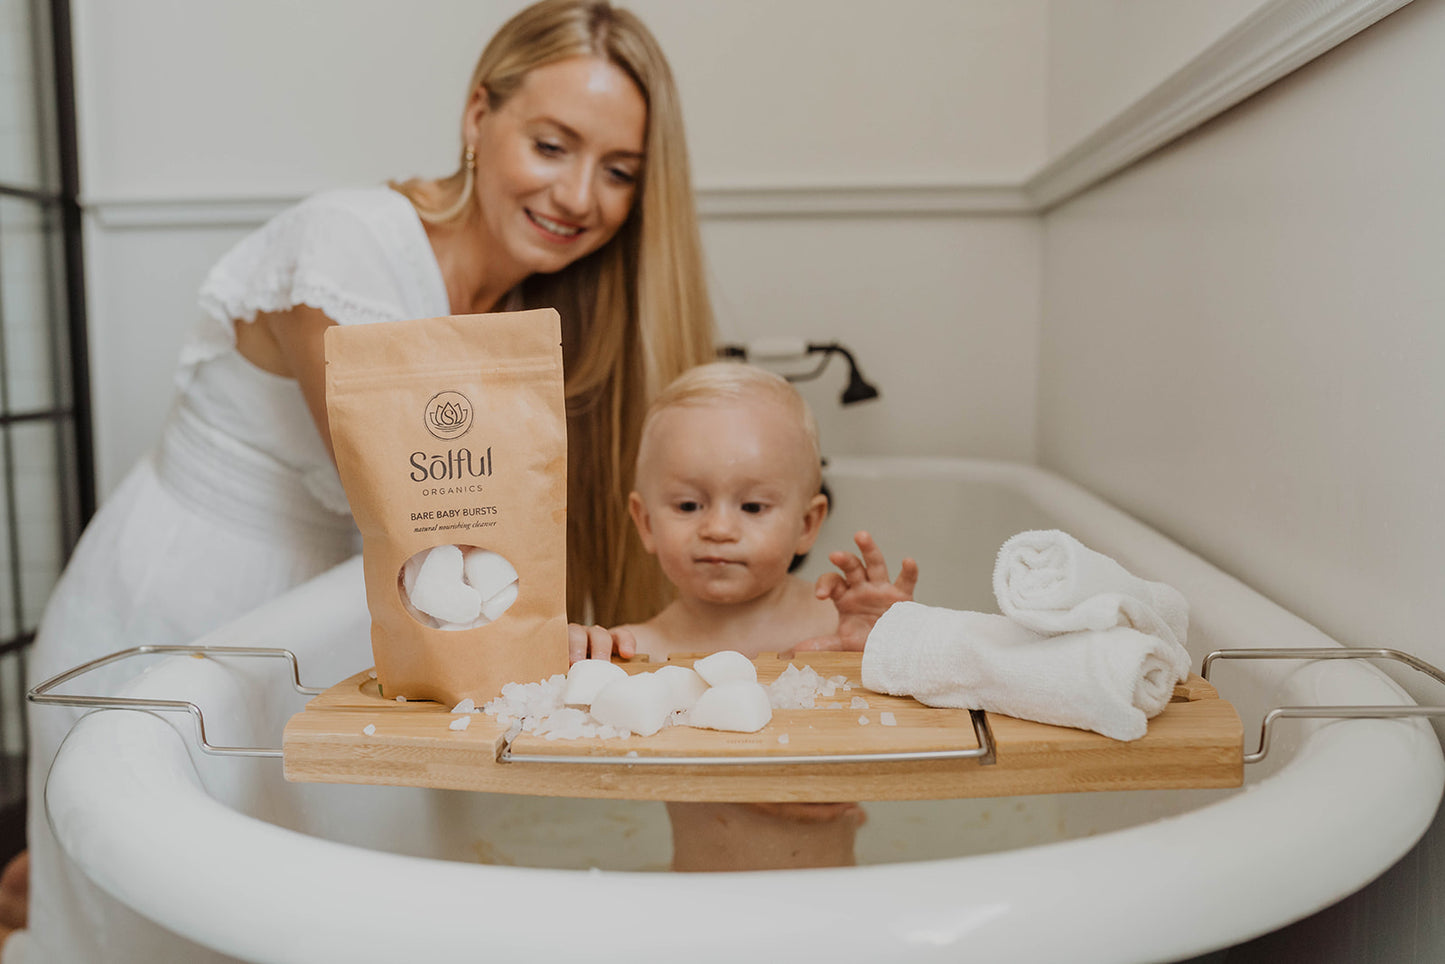 Solful Organics Bare Baby Bursts - natural cleanser